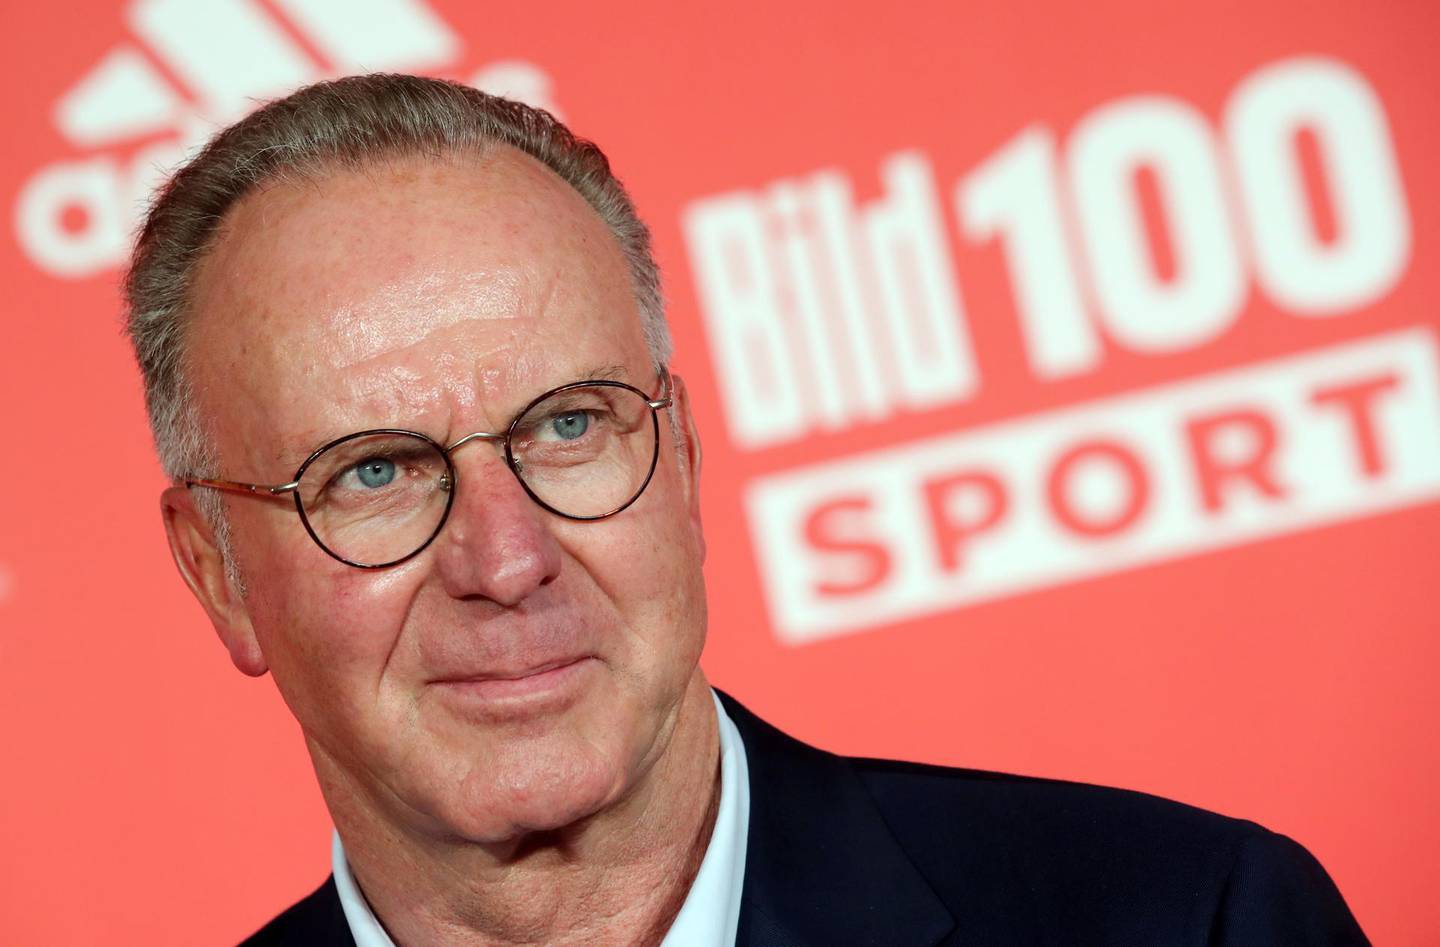 epa06746885 Bayern Munich's CEO Karl-Heinz Rummenigge on the red carpet of 'Bild100 Sport' in Berlin, Germany, 18 May 2018. The event invites 100 of the most important and influential German and International personalities of Politics, Economics and Sport.  EPA/FELIPE TRUEBA